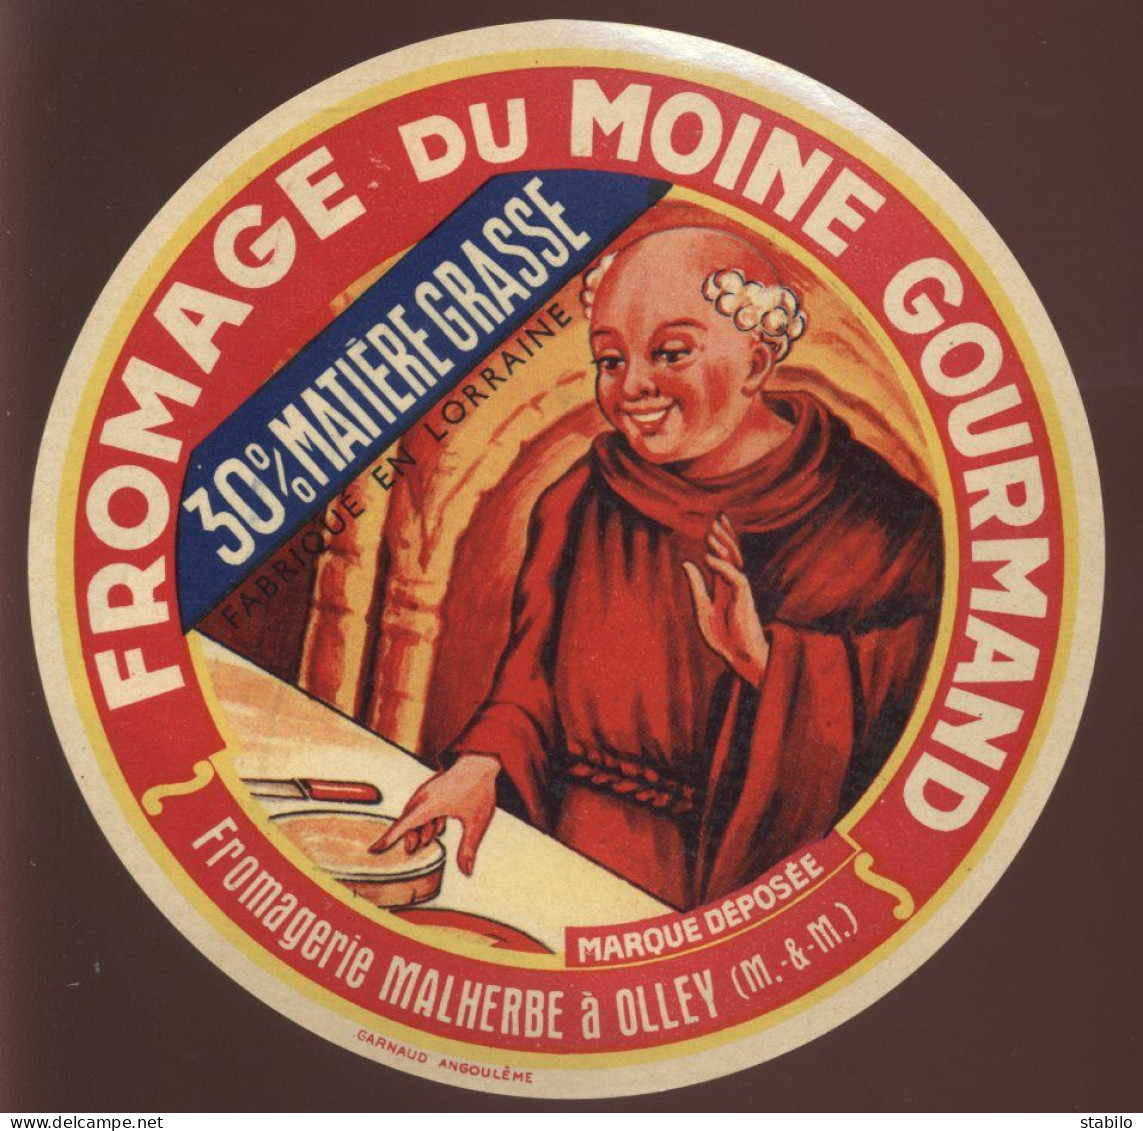 ETIQUETTE DE FROMAGE - FROMAGE DU MOINE GOURMAND - FROMAGERIE MALHERBE, OLLEY (MEURTHE-ET-MOSELLE) - Cheese